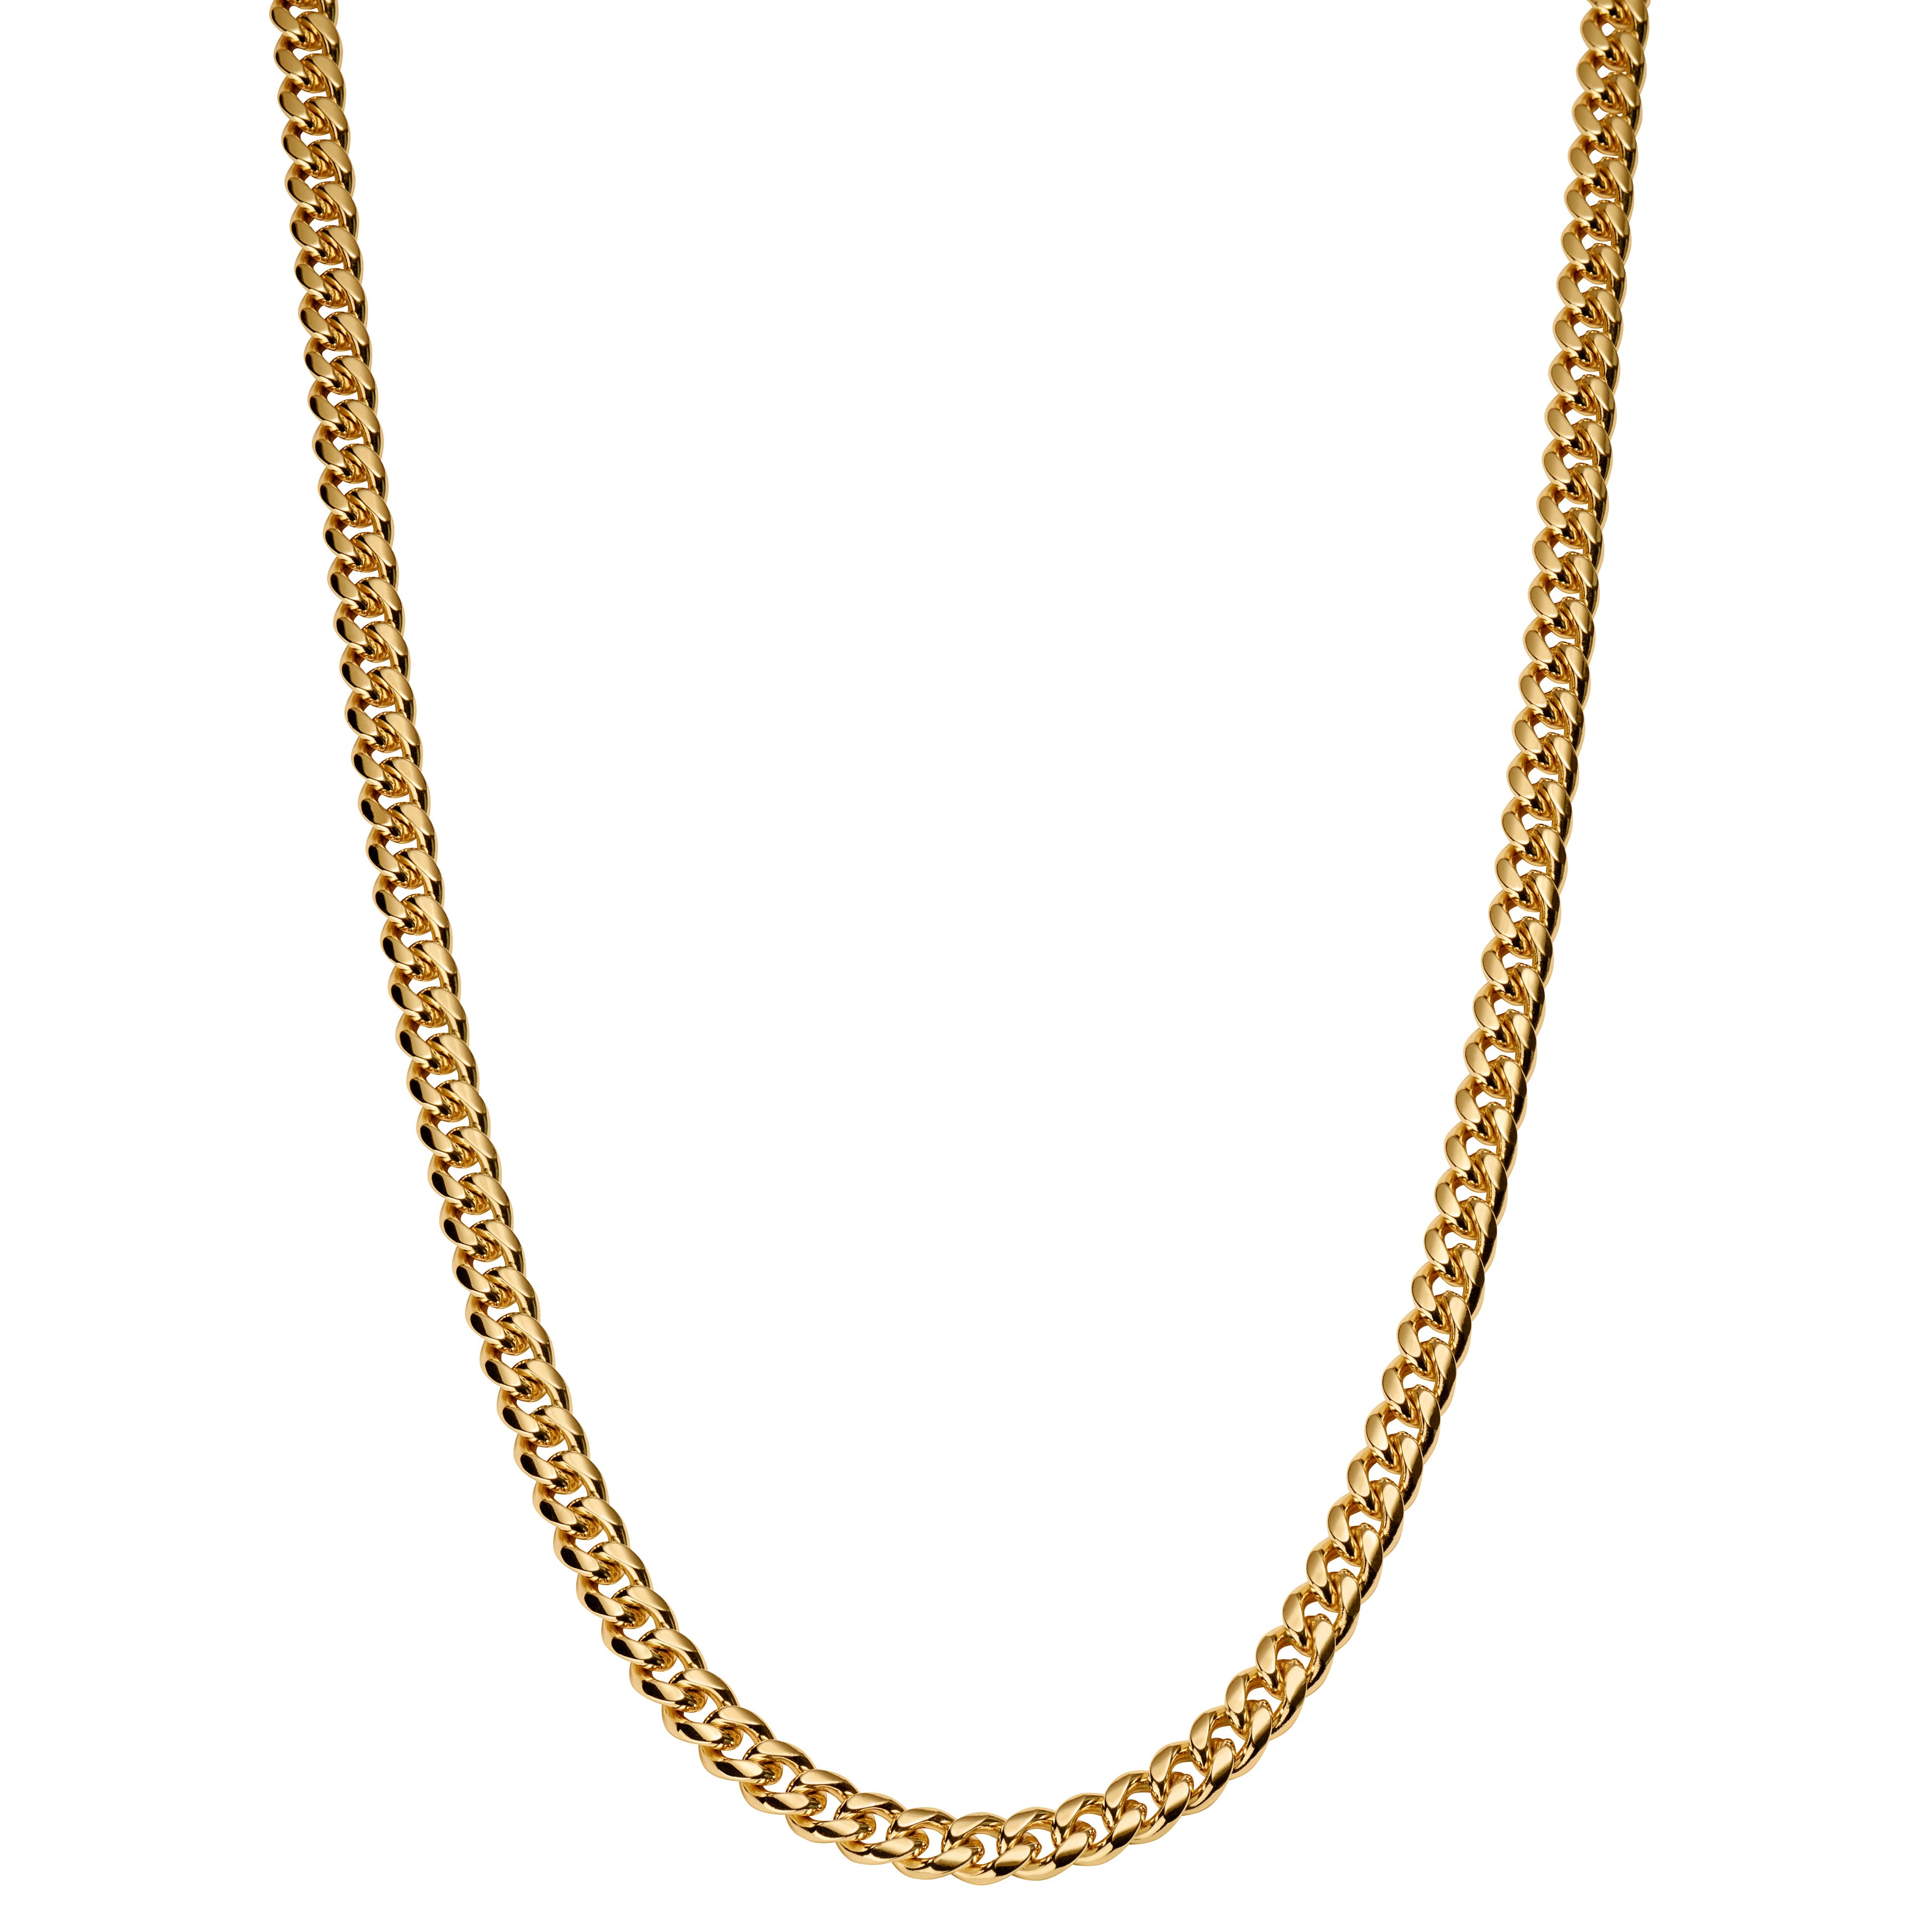 6mm Gold-Tone Chain Necklace